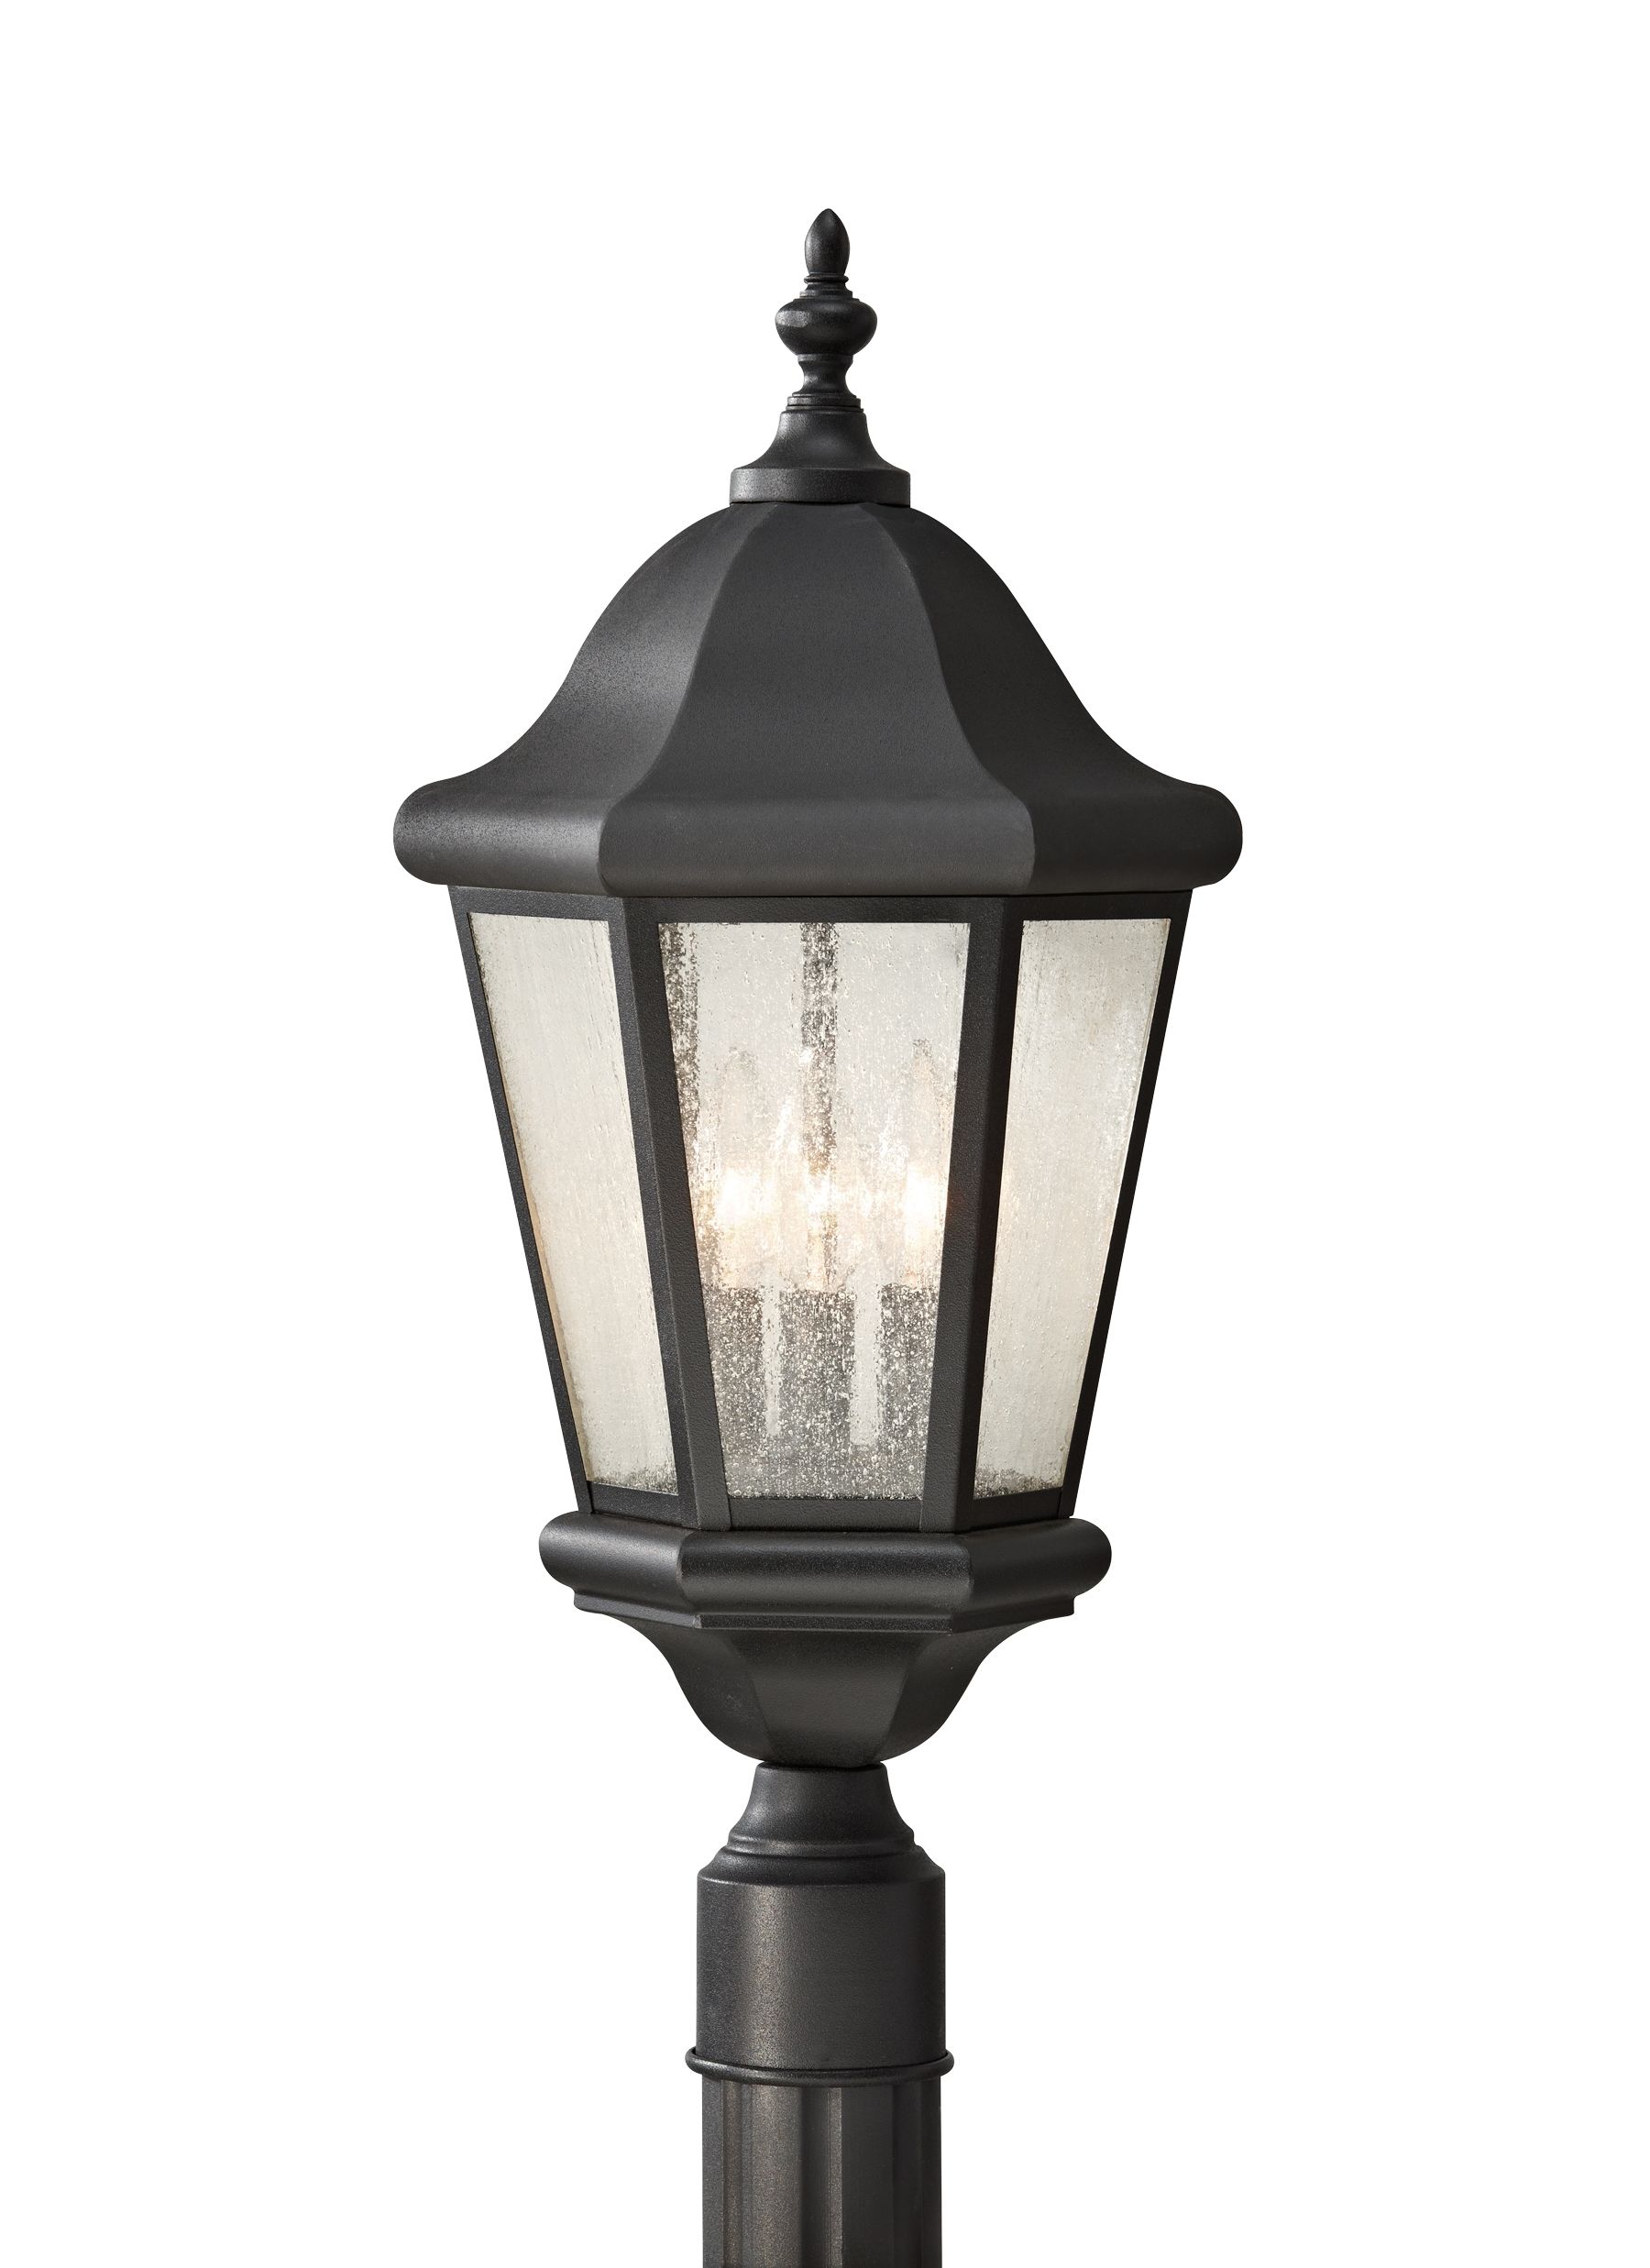 Ol5907bk,3 Light Outdoor Lantern,black Intended For Outdoor Lanterns On Stands (View 12 of 20)